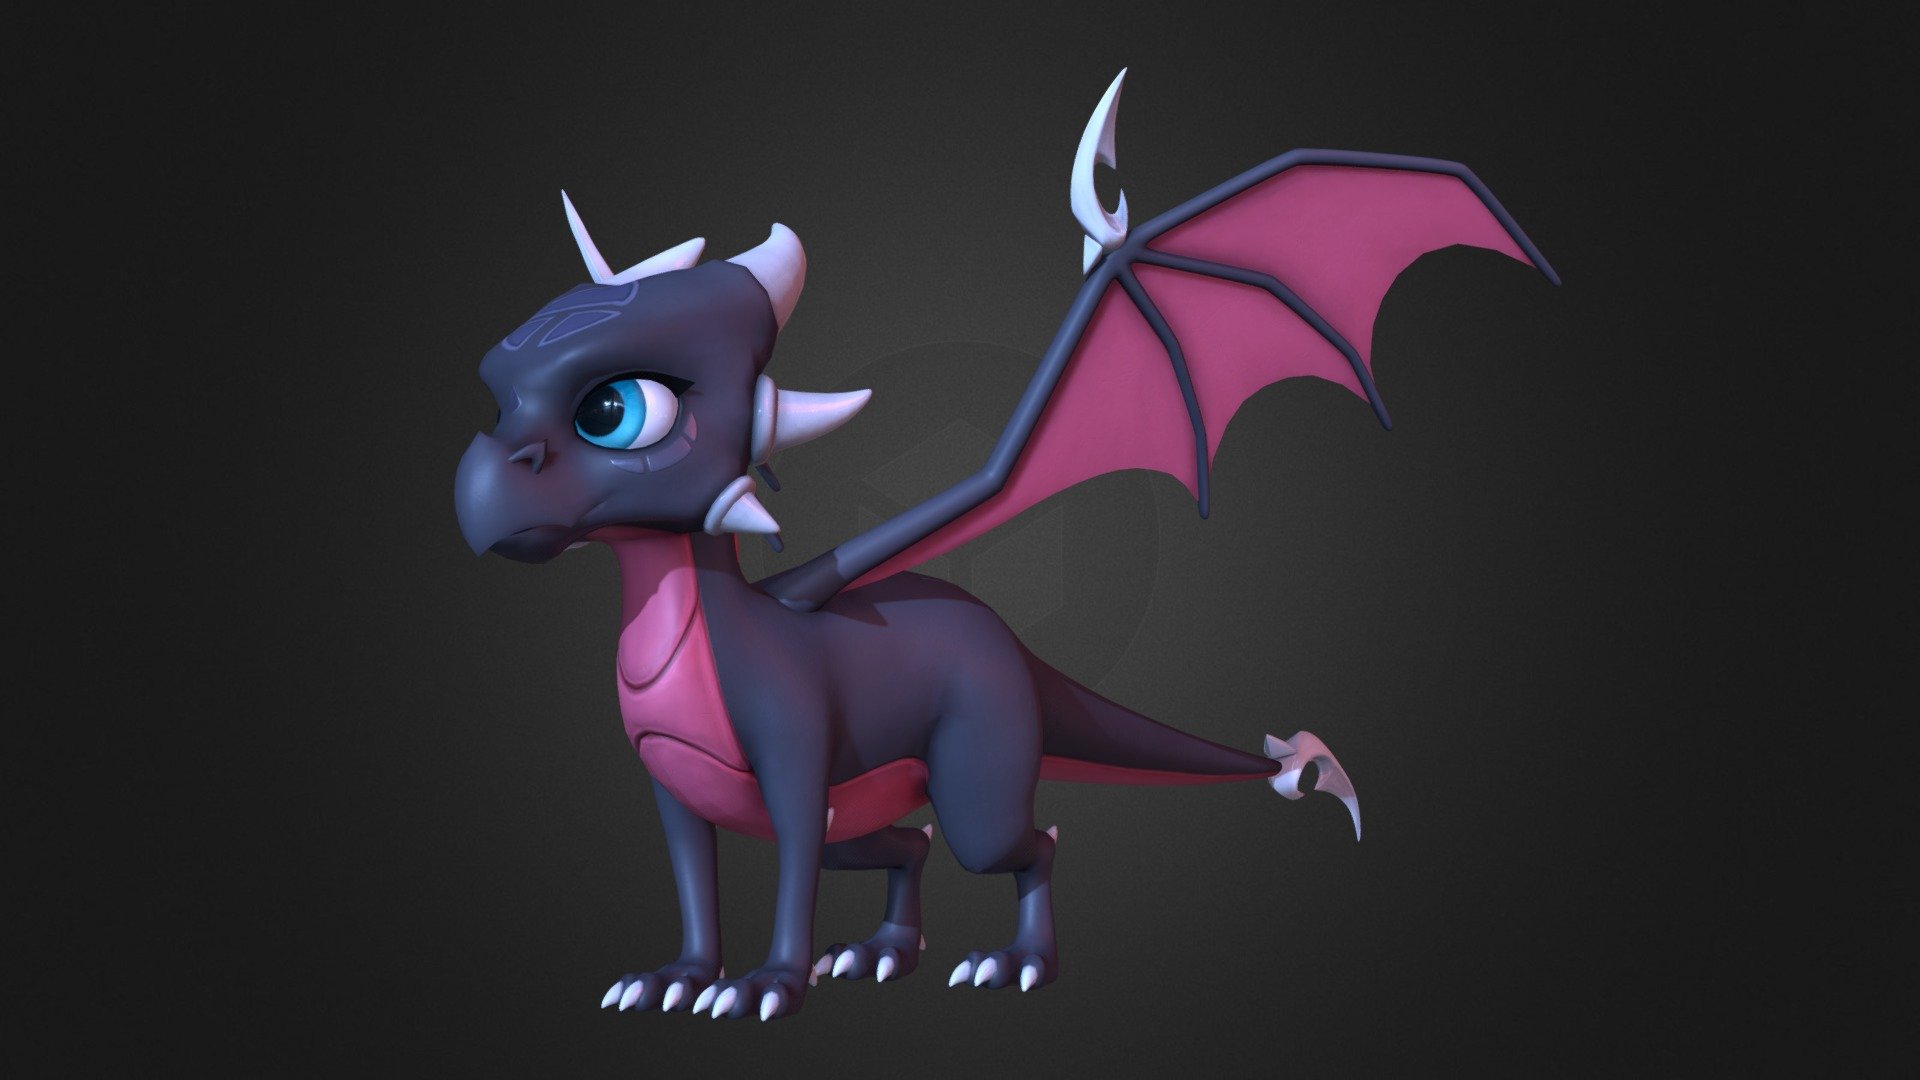 I wanted to make my own Cynder model based on Krome's version of her - chonkier, larger head and a more leathery look. I'm really happy with this, but it was a rollercoaster of ups and downs to make, let me tell you!

She's missing her teeth and tongue but I don't have any plans of rigging her any time soon, so they're not a big priority 3d model